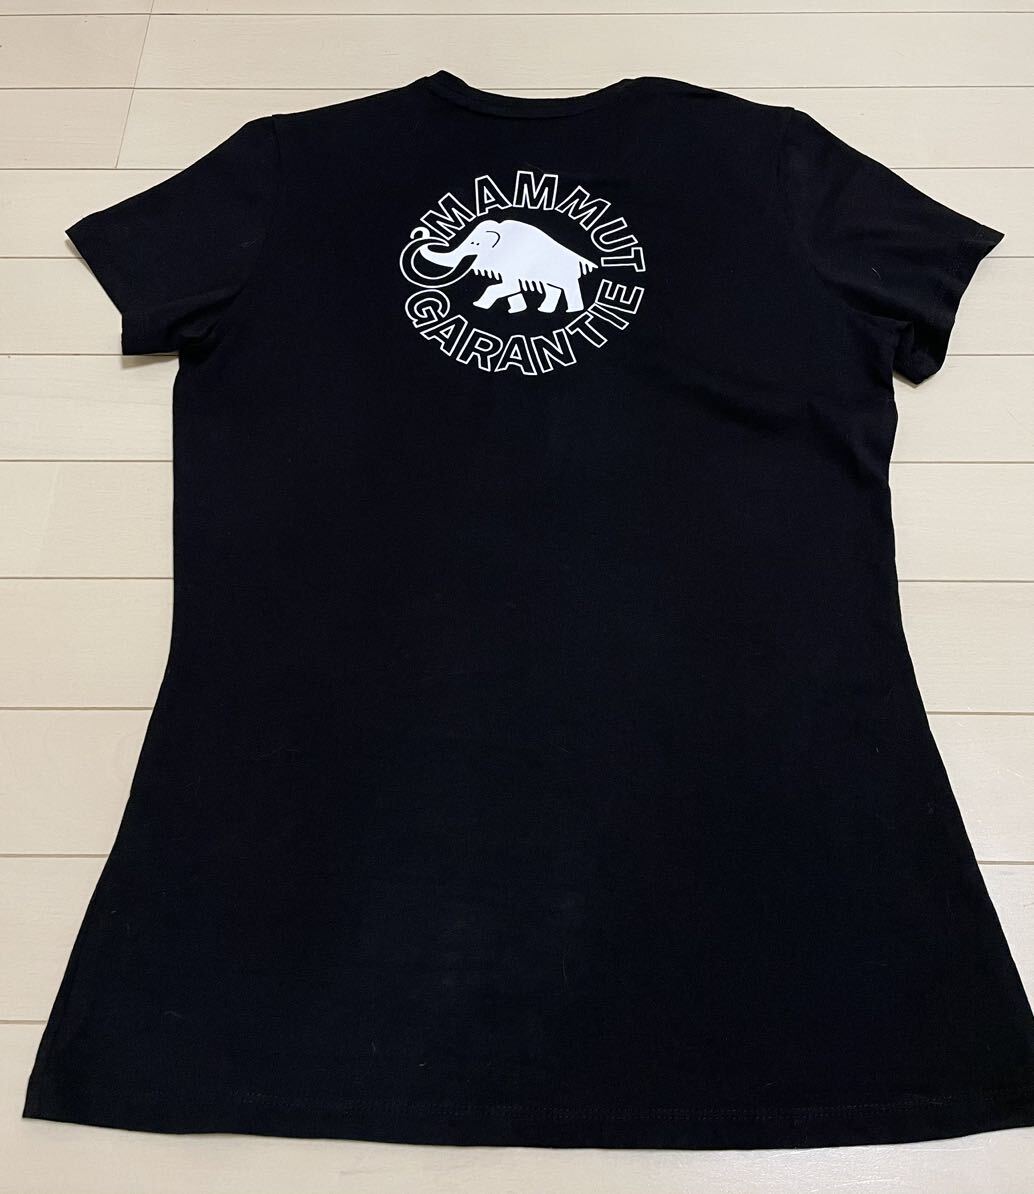 2 times have on beautiful goods Mammut M size lady's T-shirt short sleeves black MUMMUT search ) Millet Marmot Colombia 